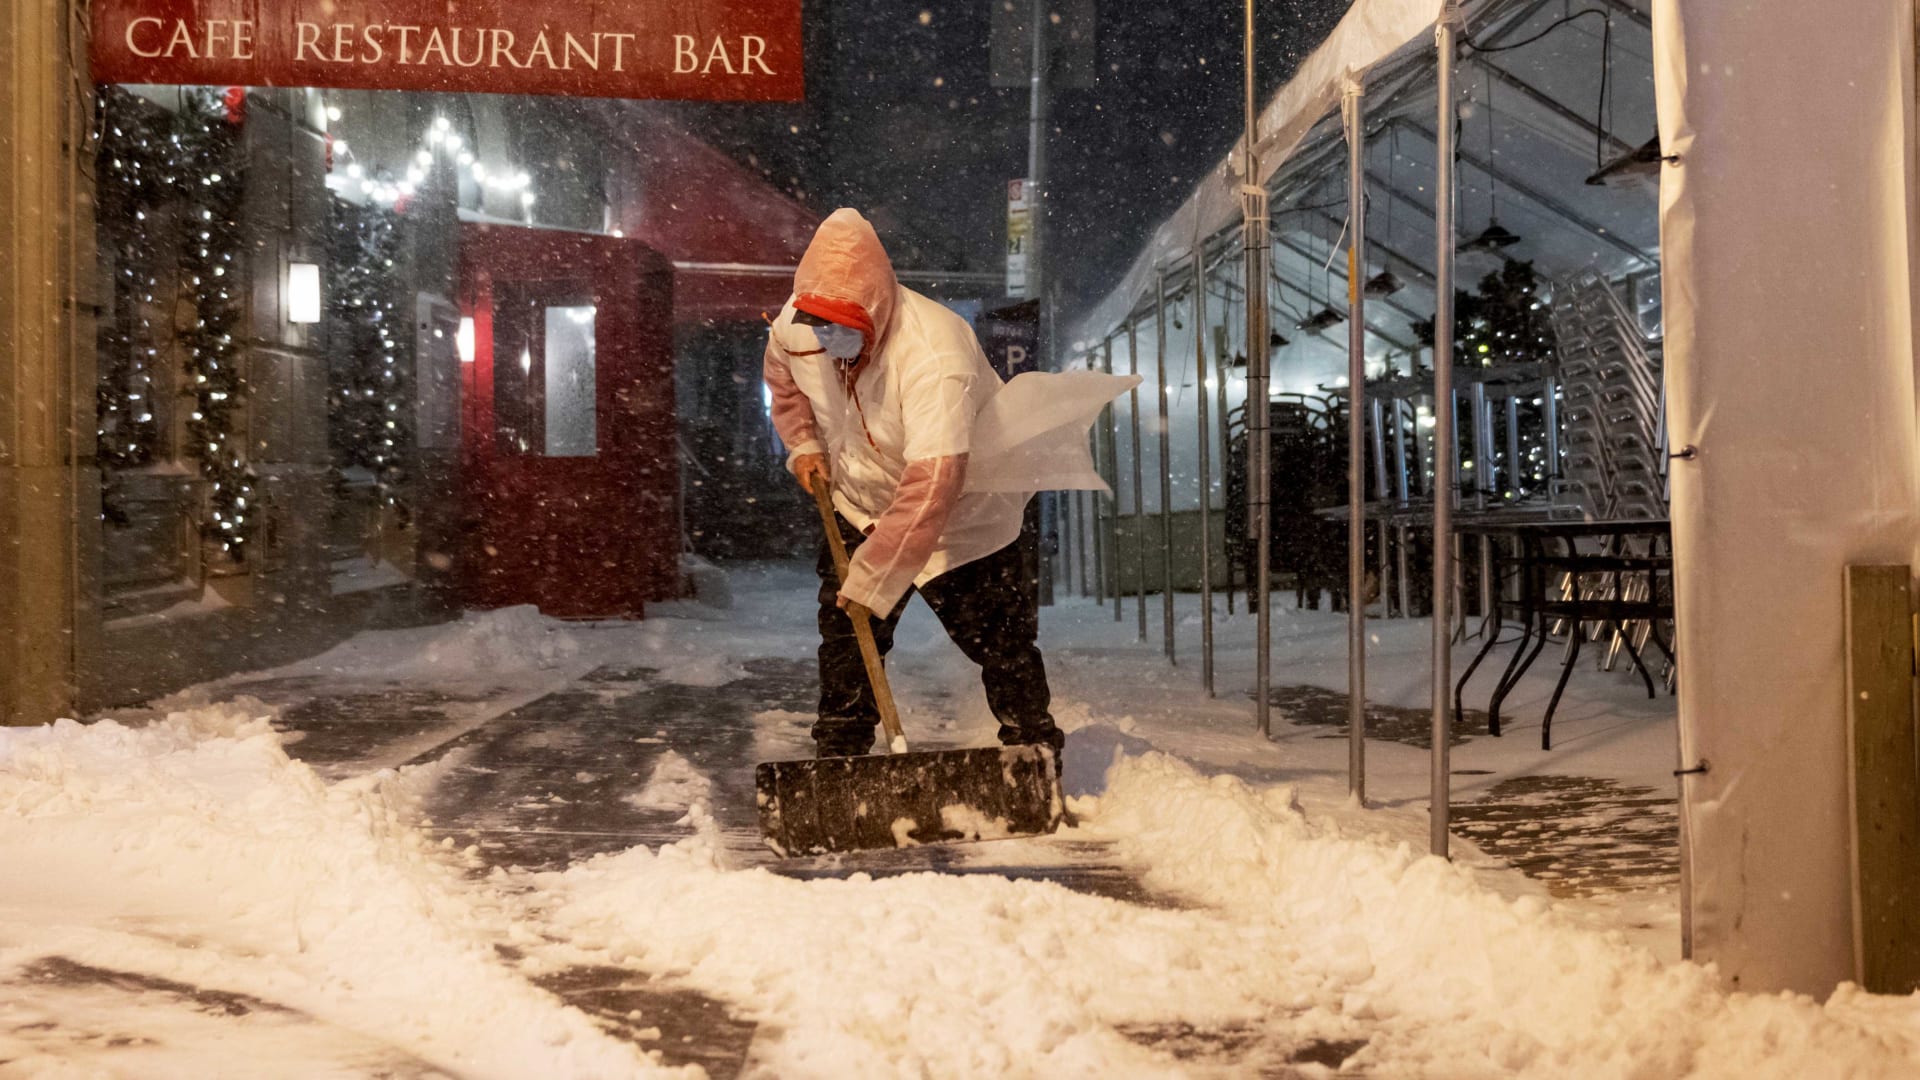 Restaurants' Winter Plan: Anything and Everything to Stay Alive